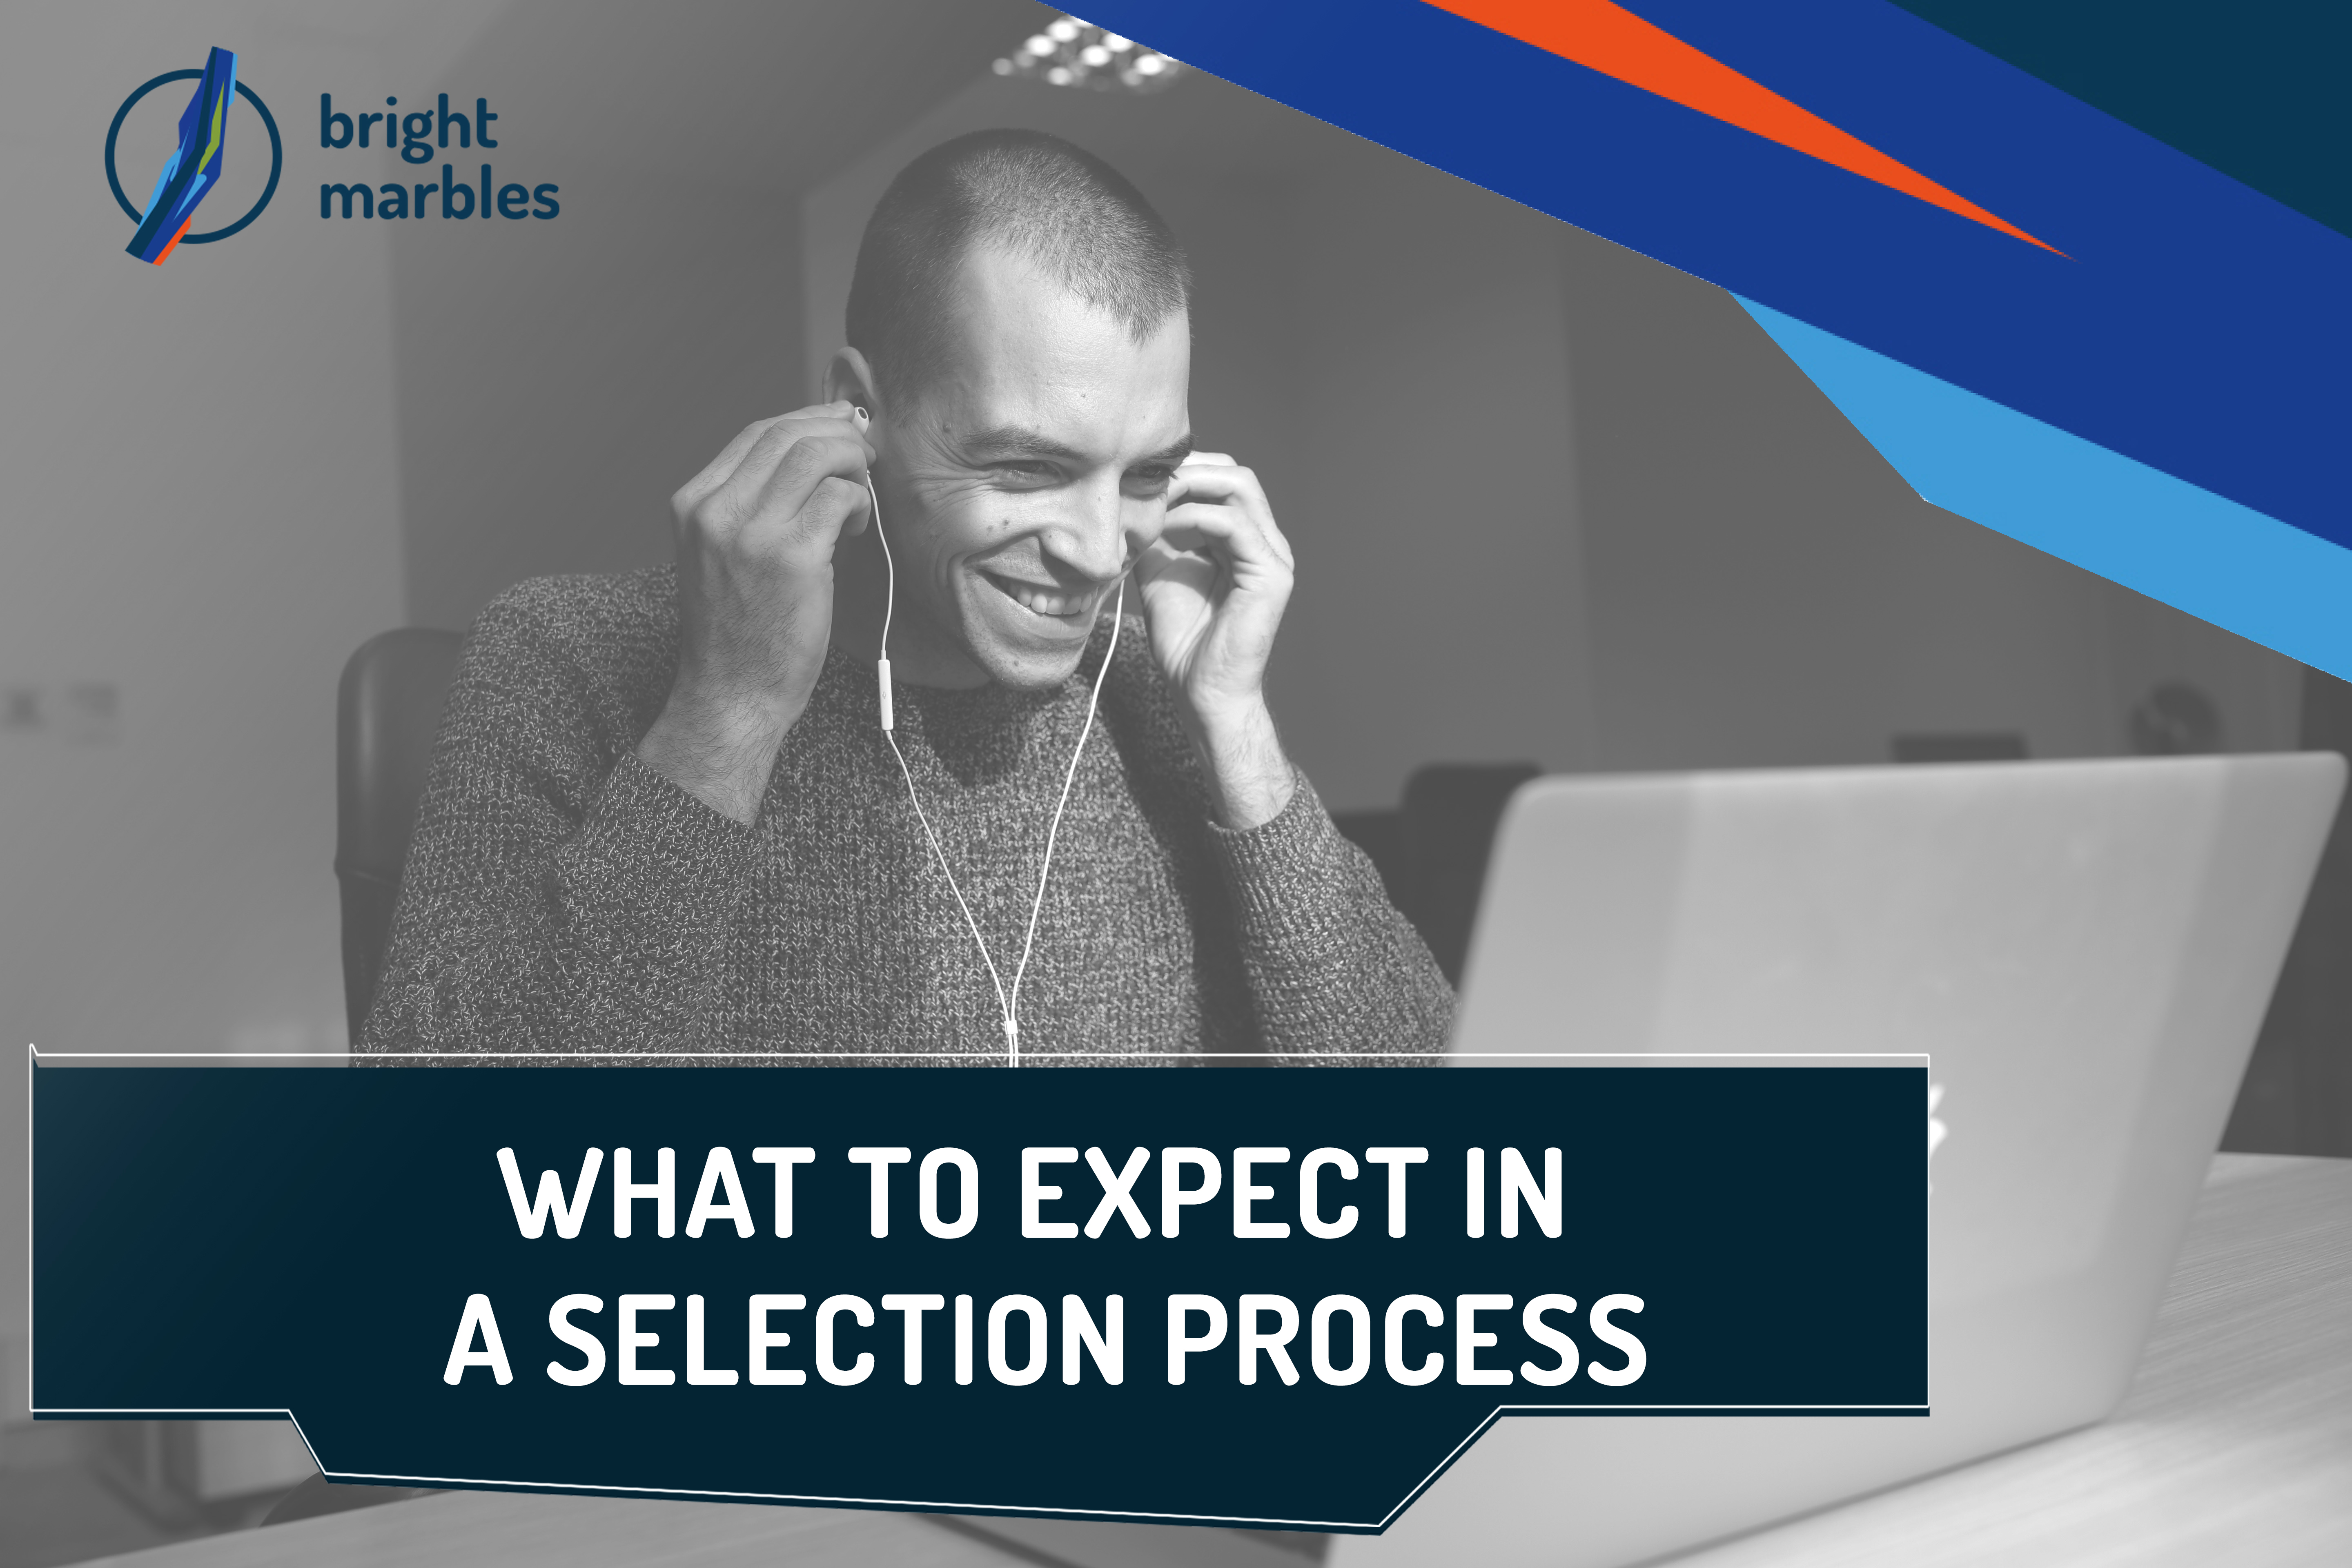 What to expect in a selection process